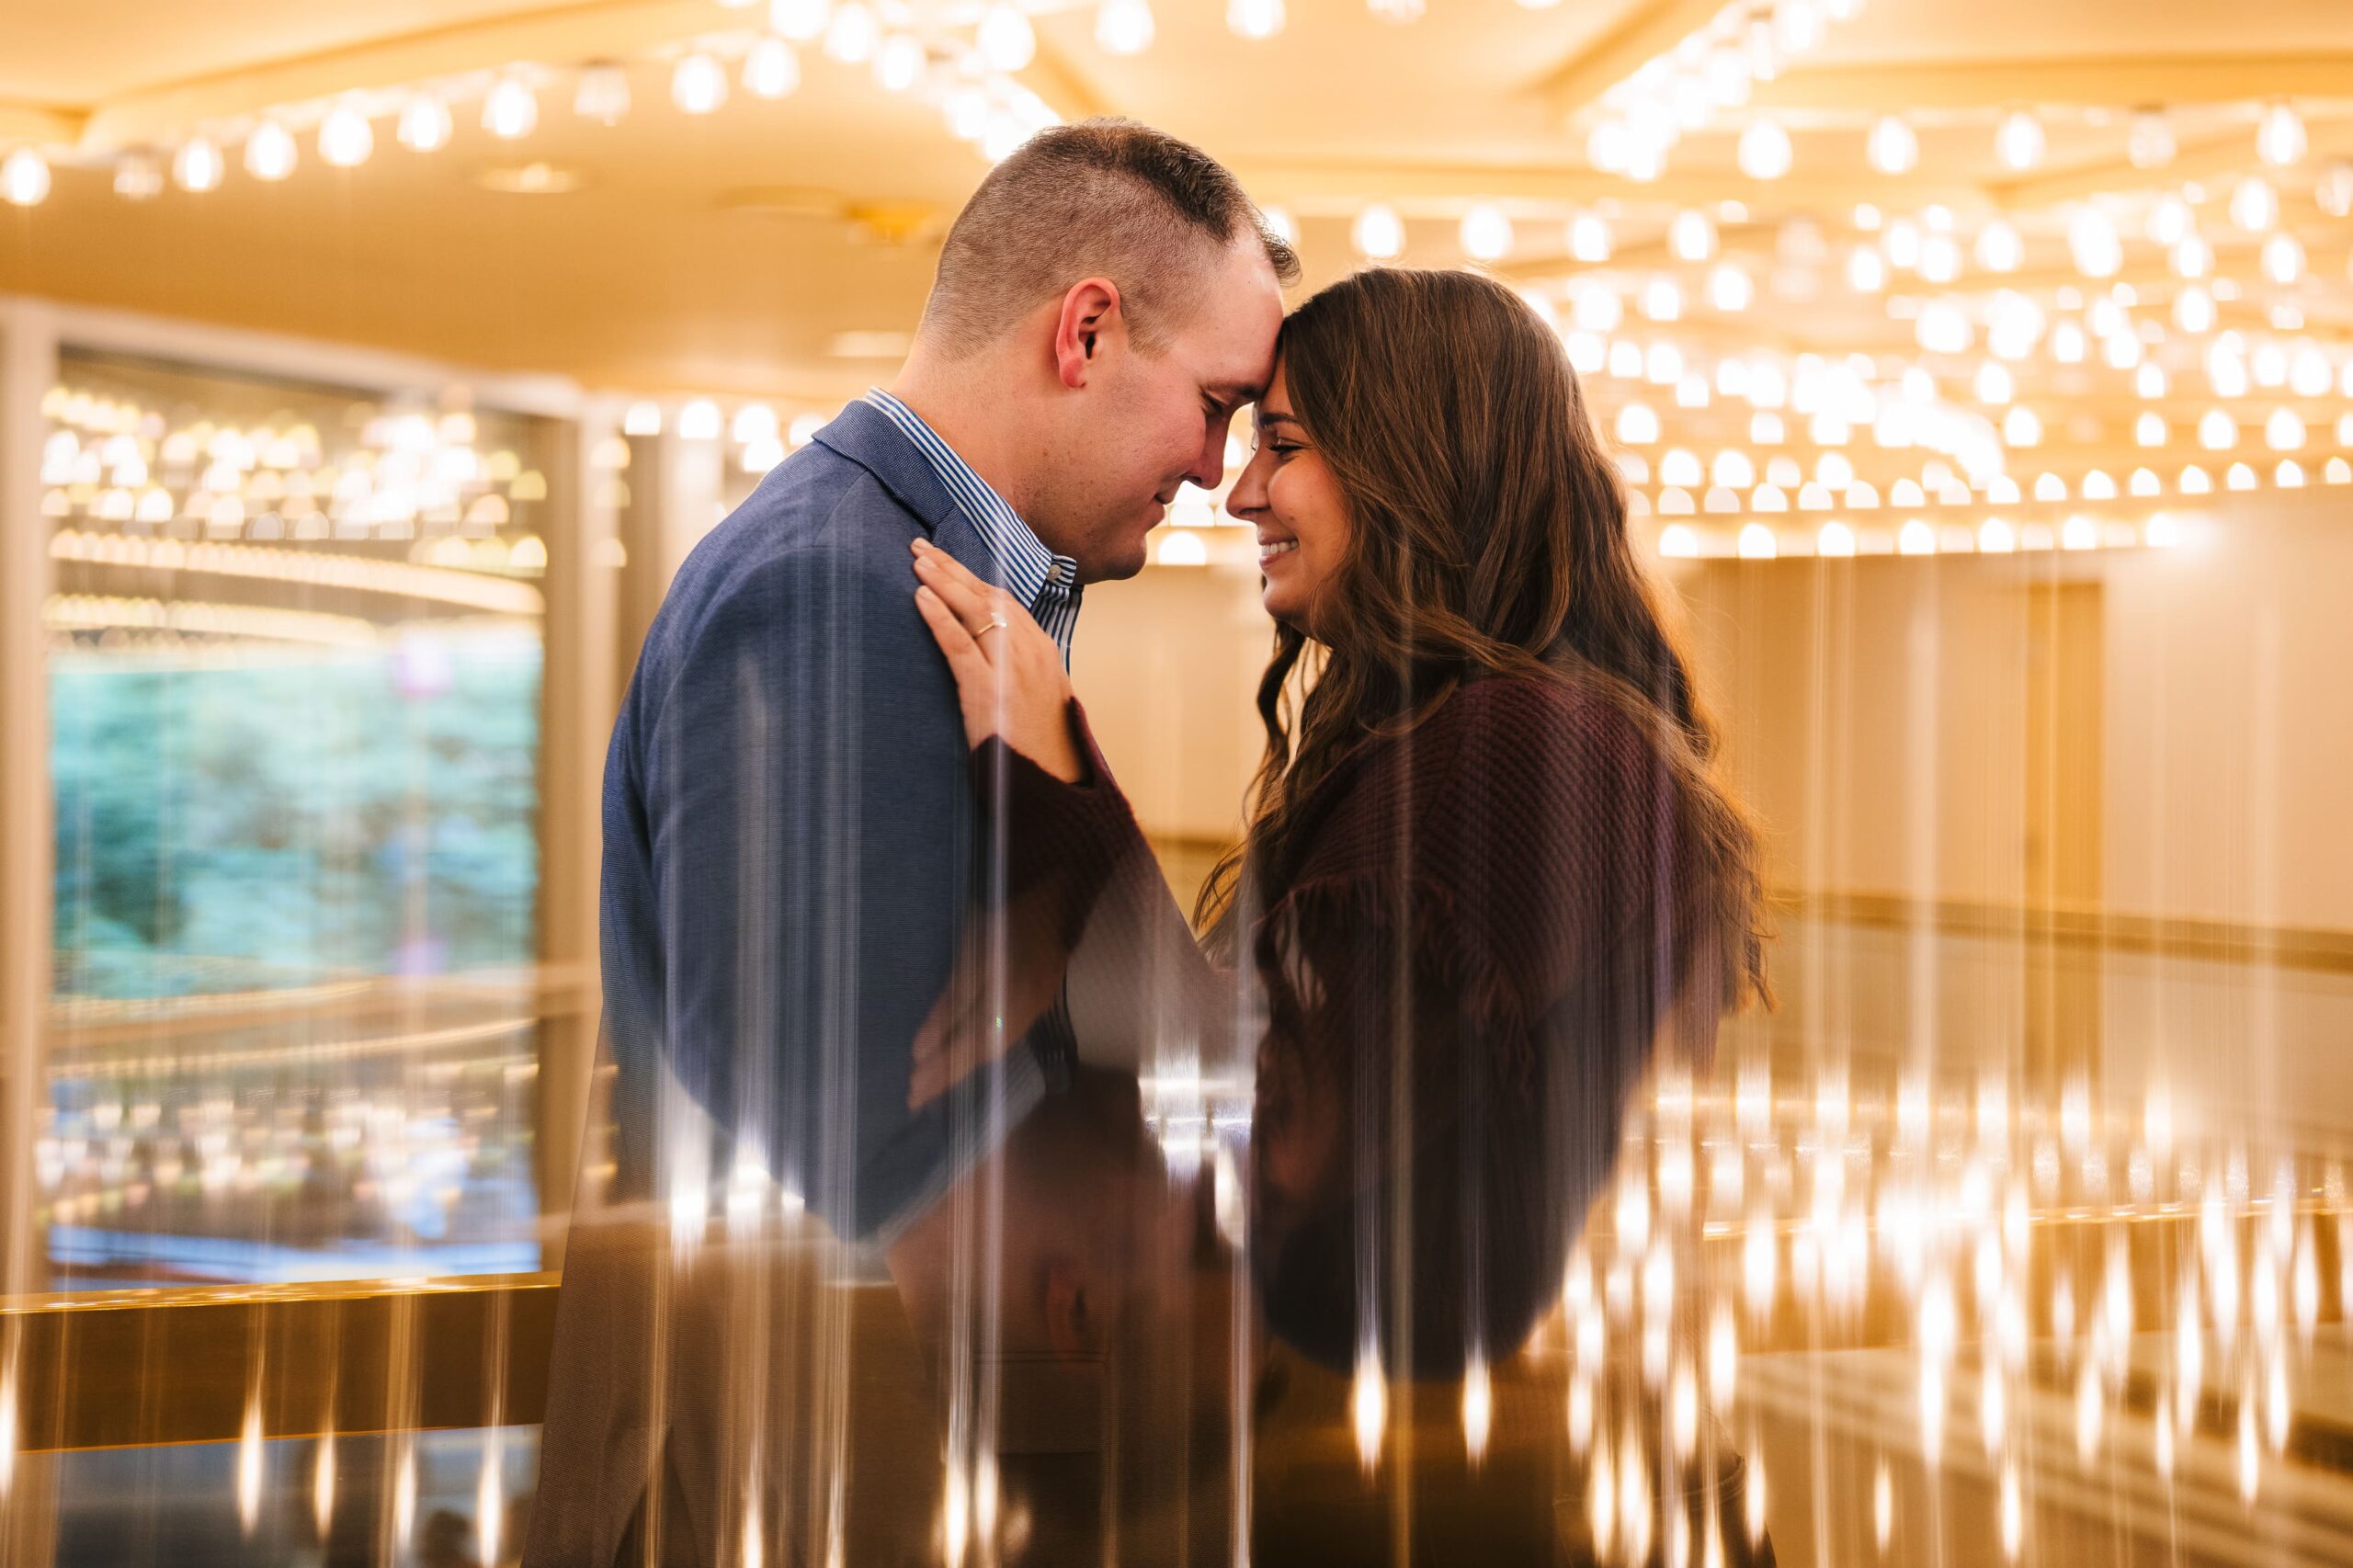 Lovely couple sharing an intimate moment during their engagement at the Flamingo while the best wedding photographer in Las Vegas captures a creative image using the lights and reflections.